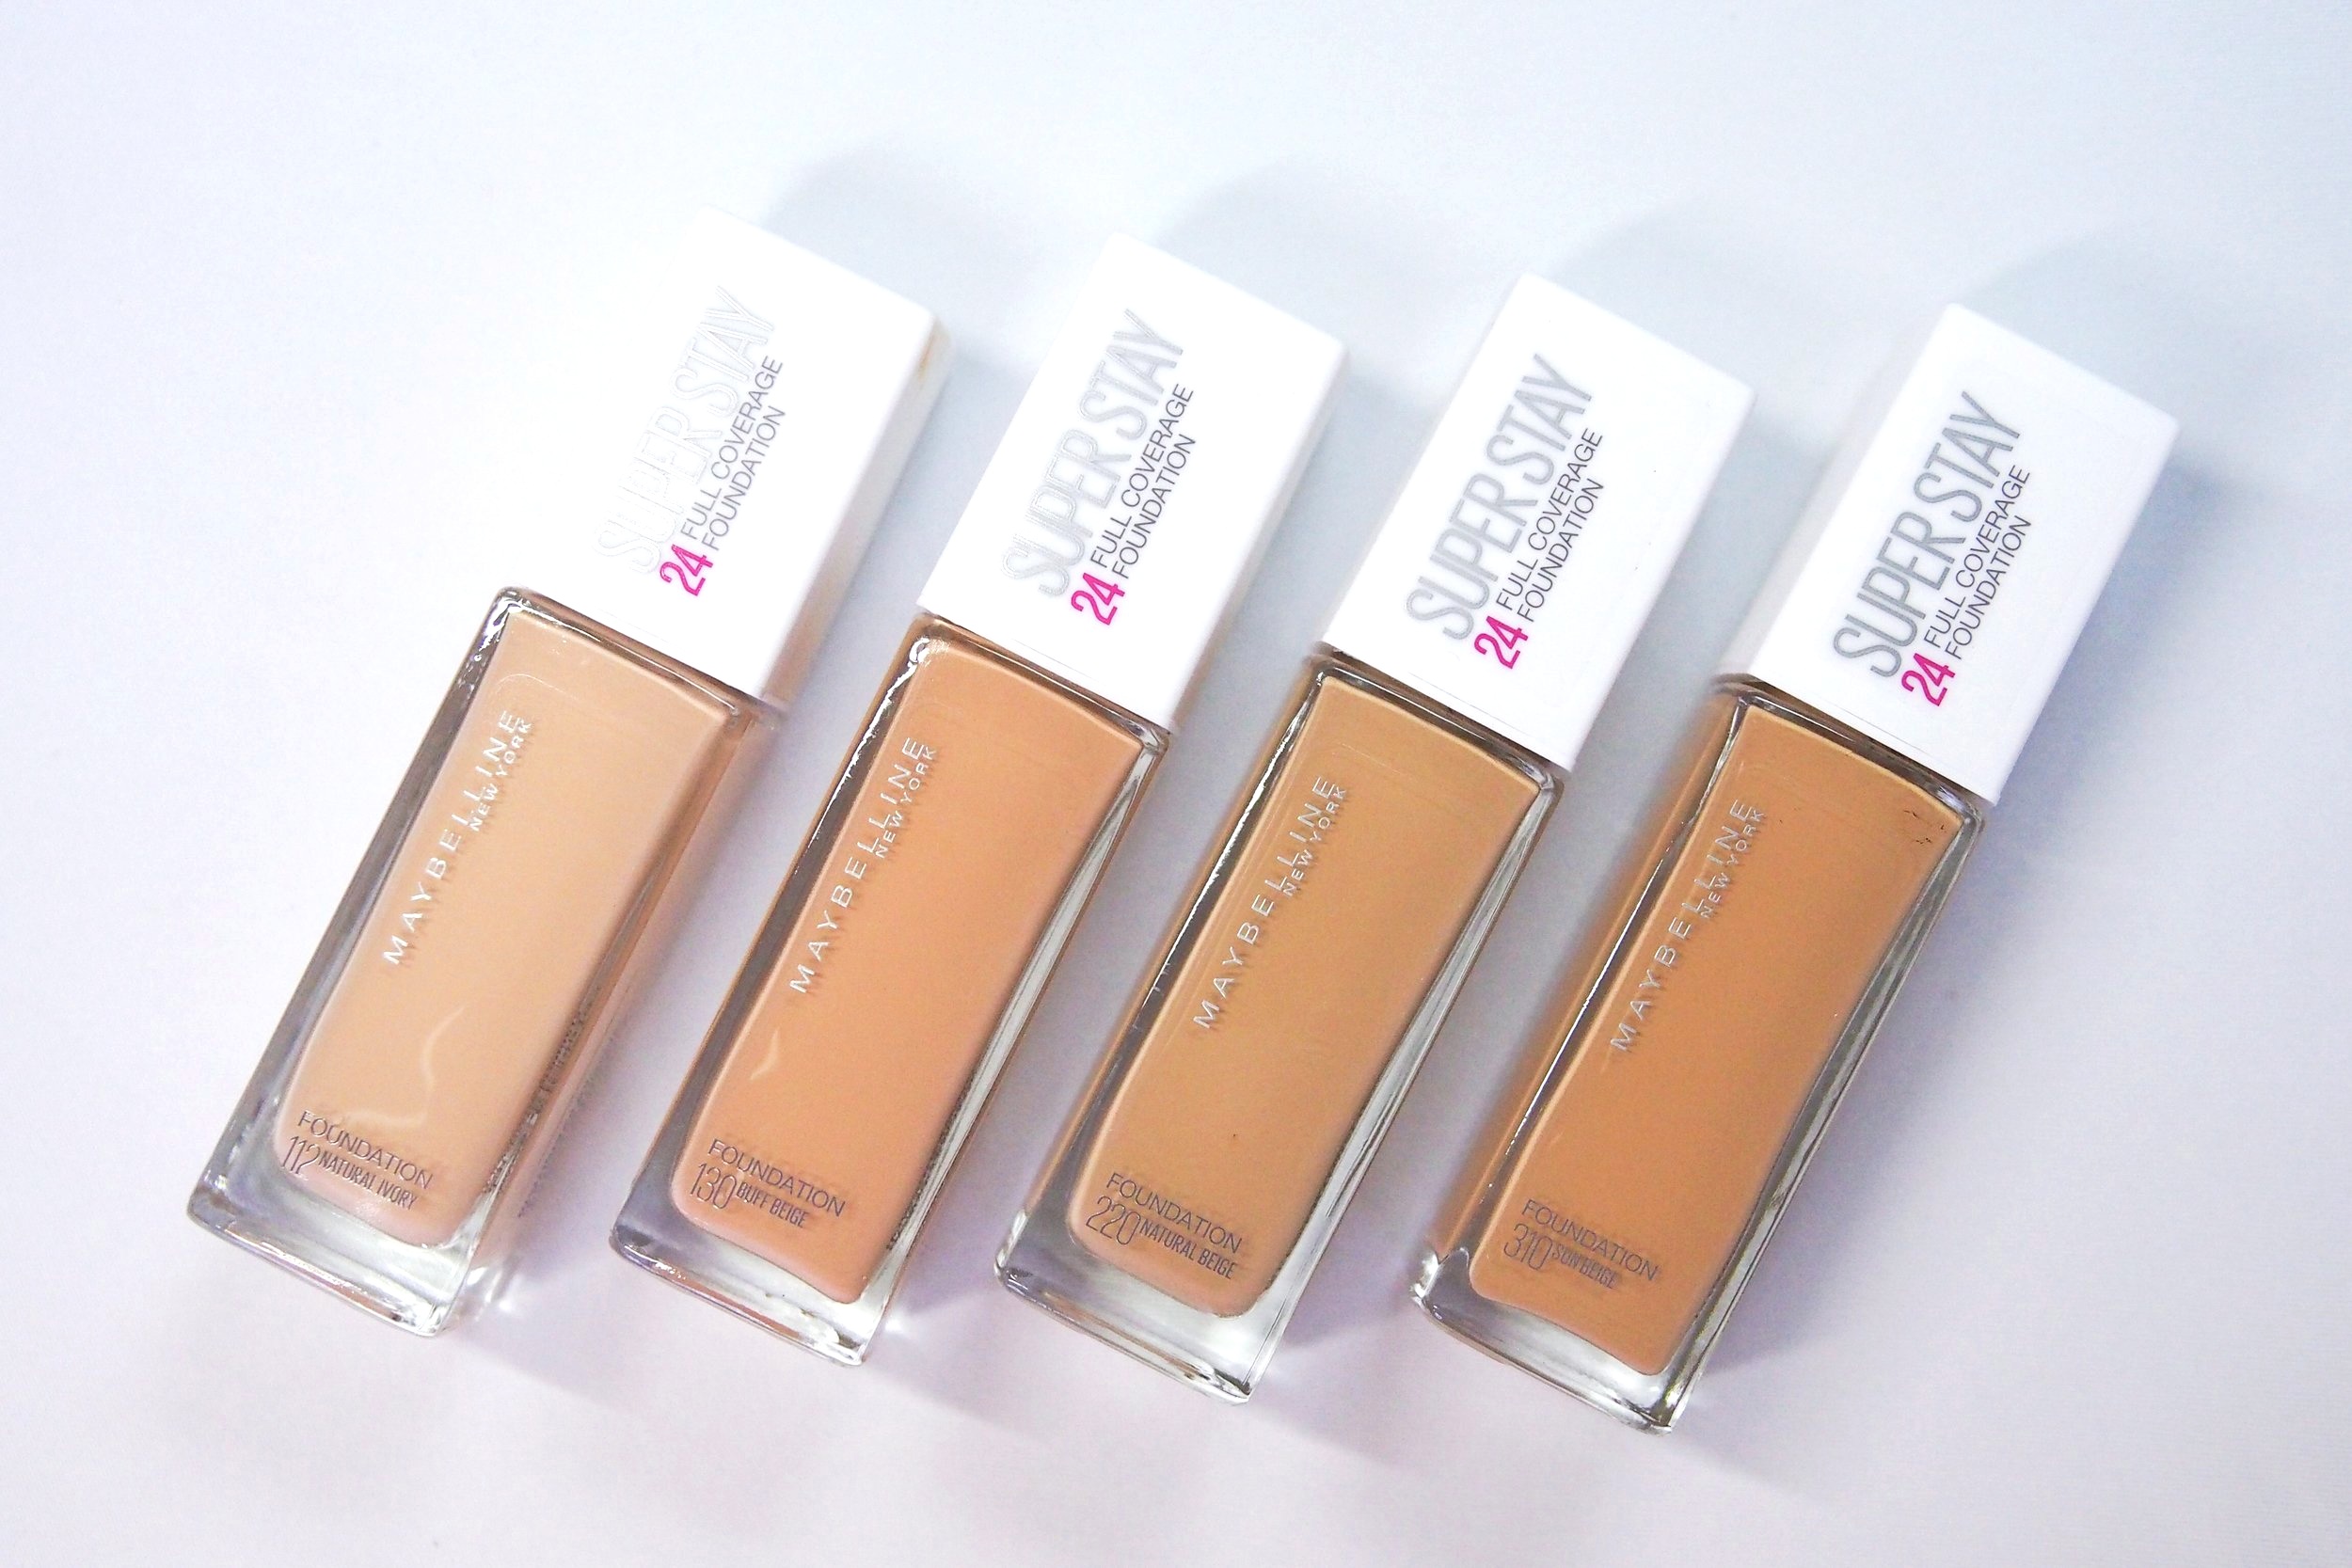 Maybelline Super Stay 24 Hour Foundation - Choose Shade